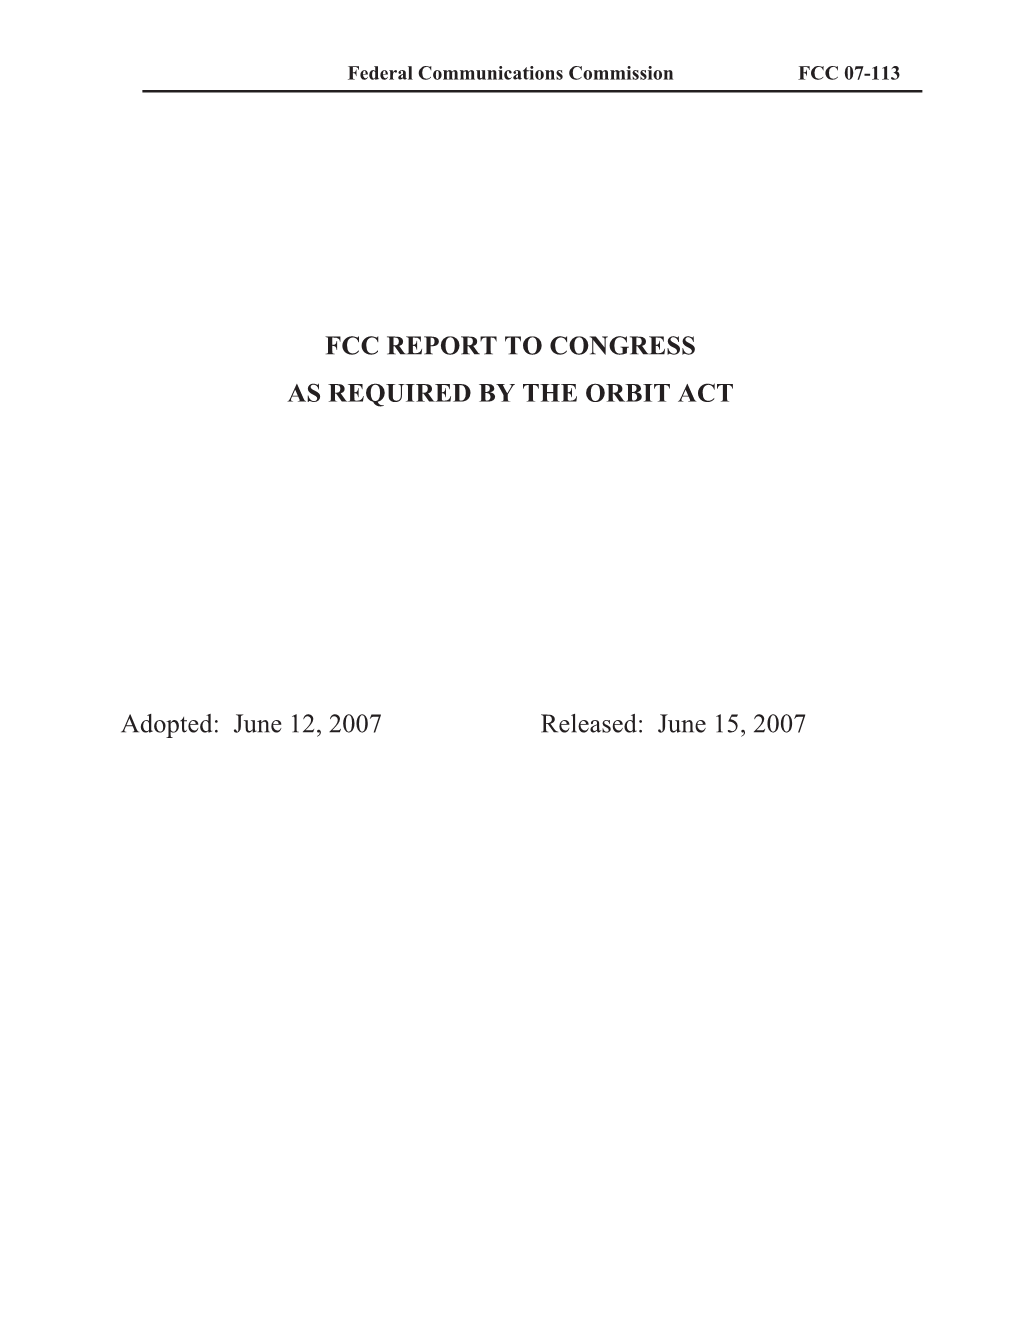 Fcc Report to Congress As Required by the Orbit Act